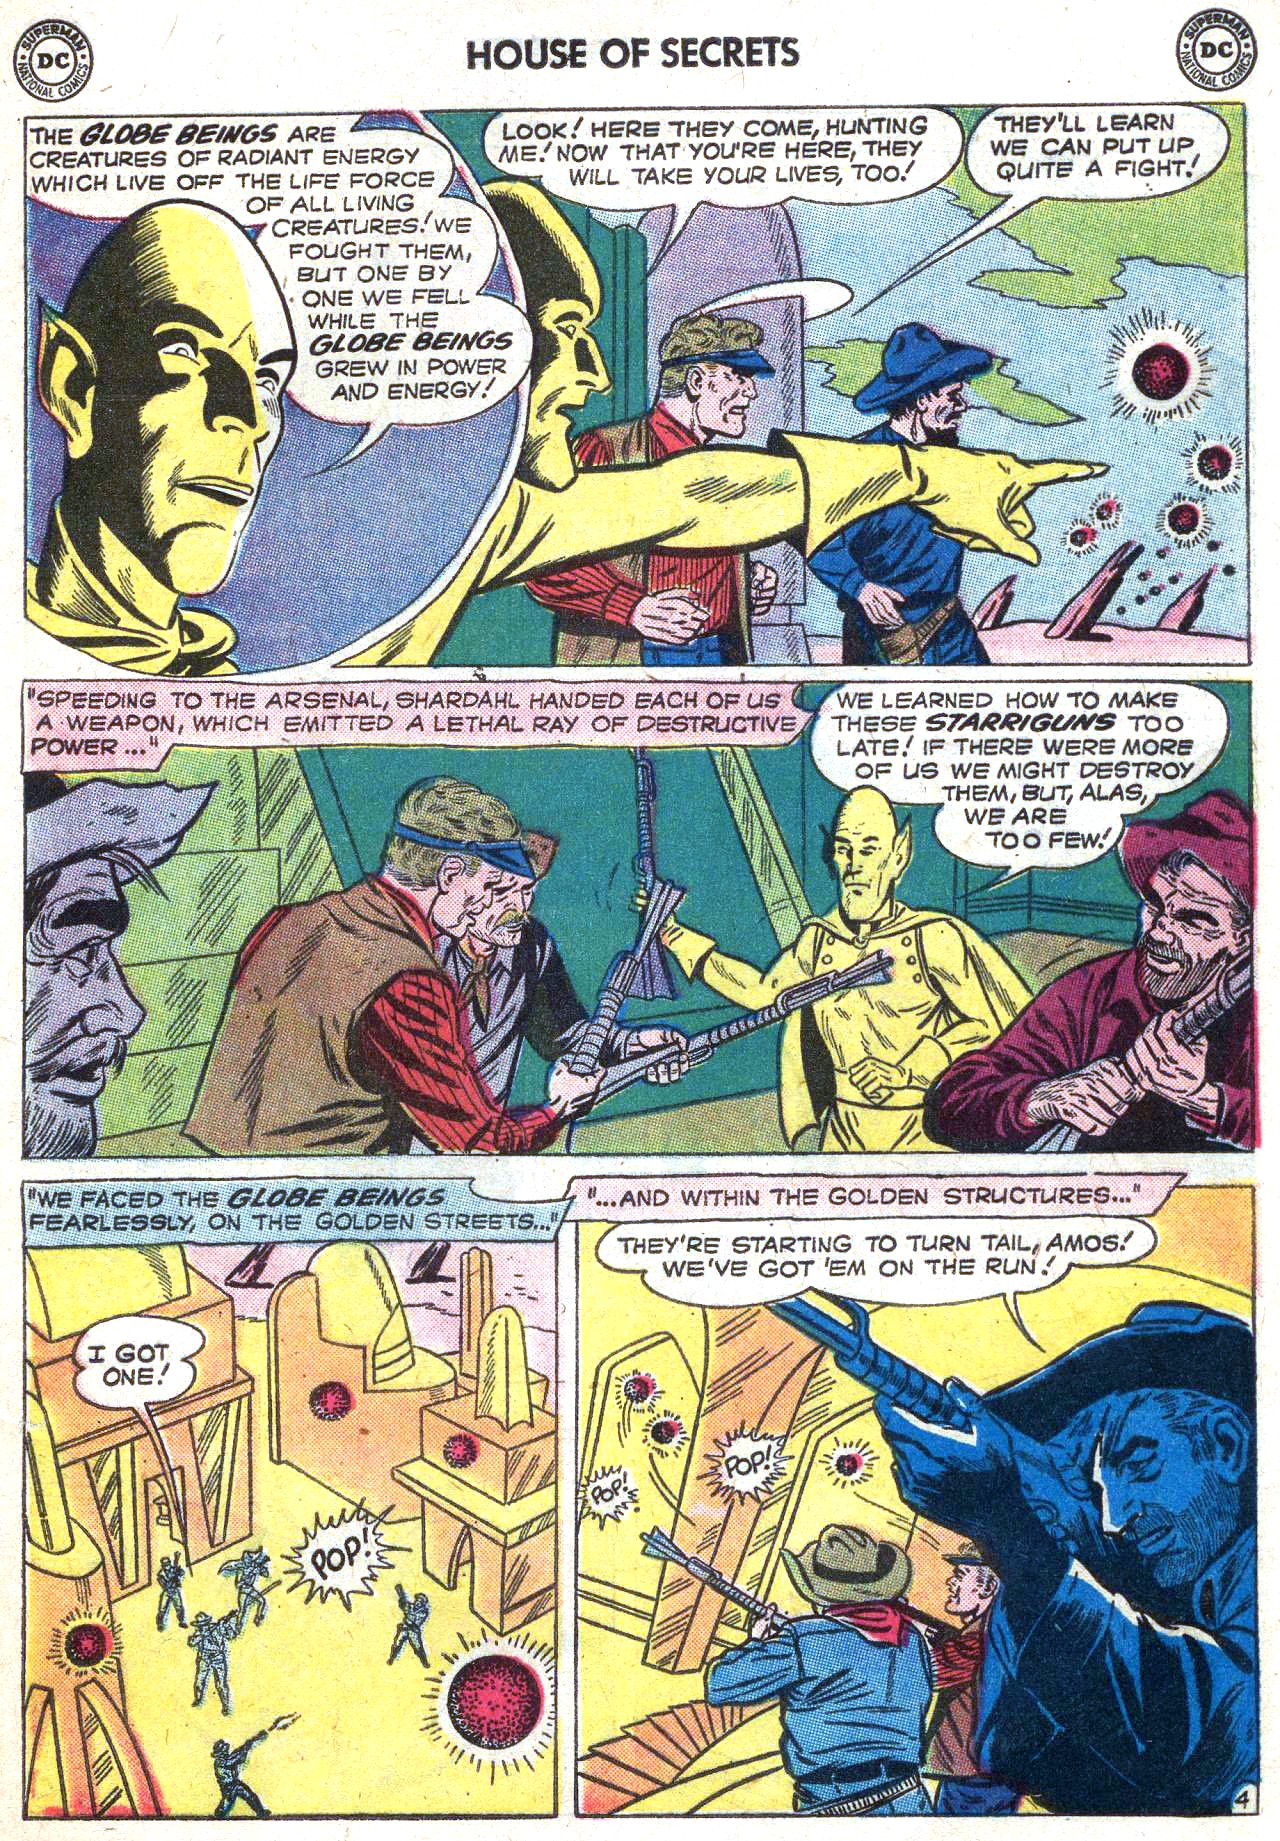 House of Secrets (1956) Issue #21 #21 - English 21